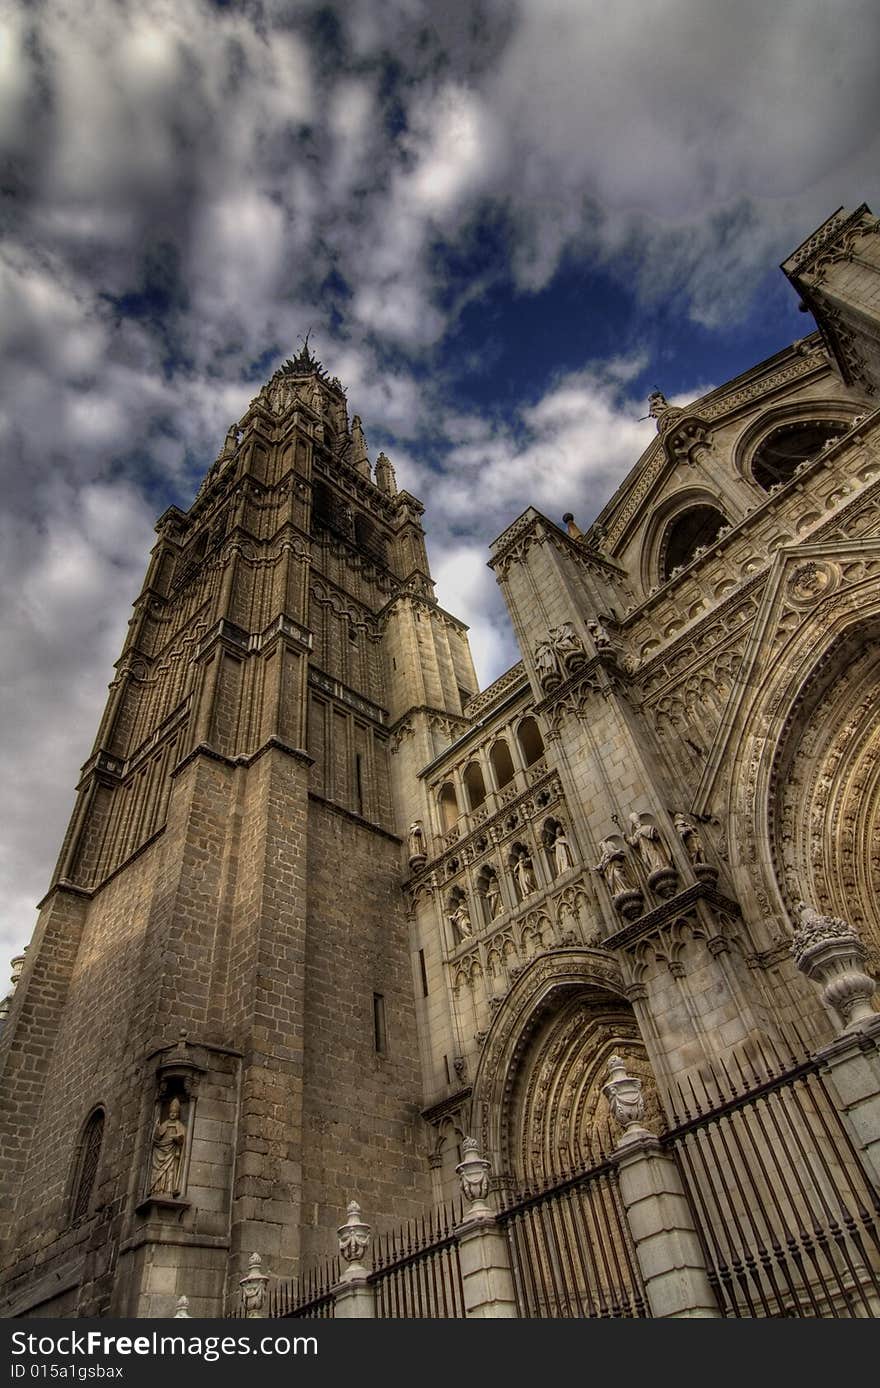 The Cathedral of Saint Mary of Toledo, also called Primate Cathedral of Toledo, Spain, seat of the Archdiocese of Toledo, is one of the three 13th century High Gothic cathedrals in Spain and is considered to be the magnum opus of the Gothic style in Spain.